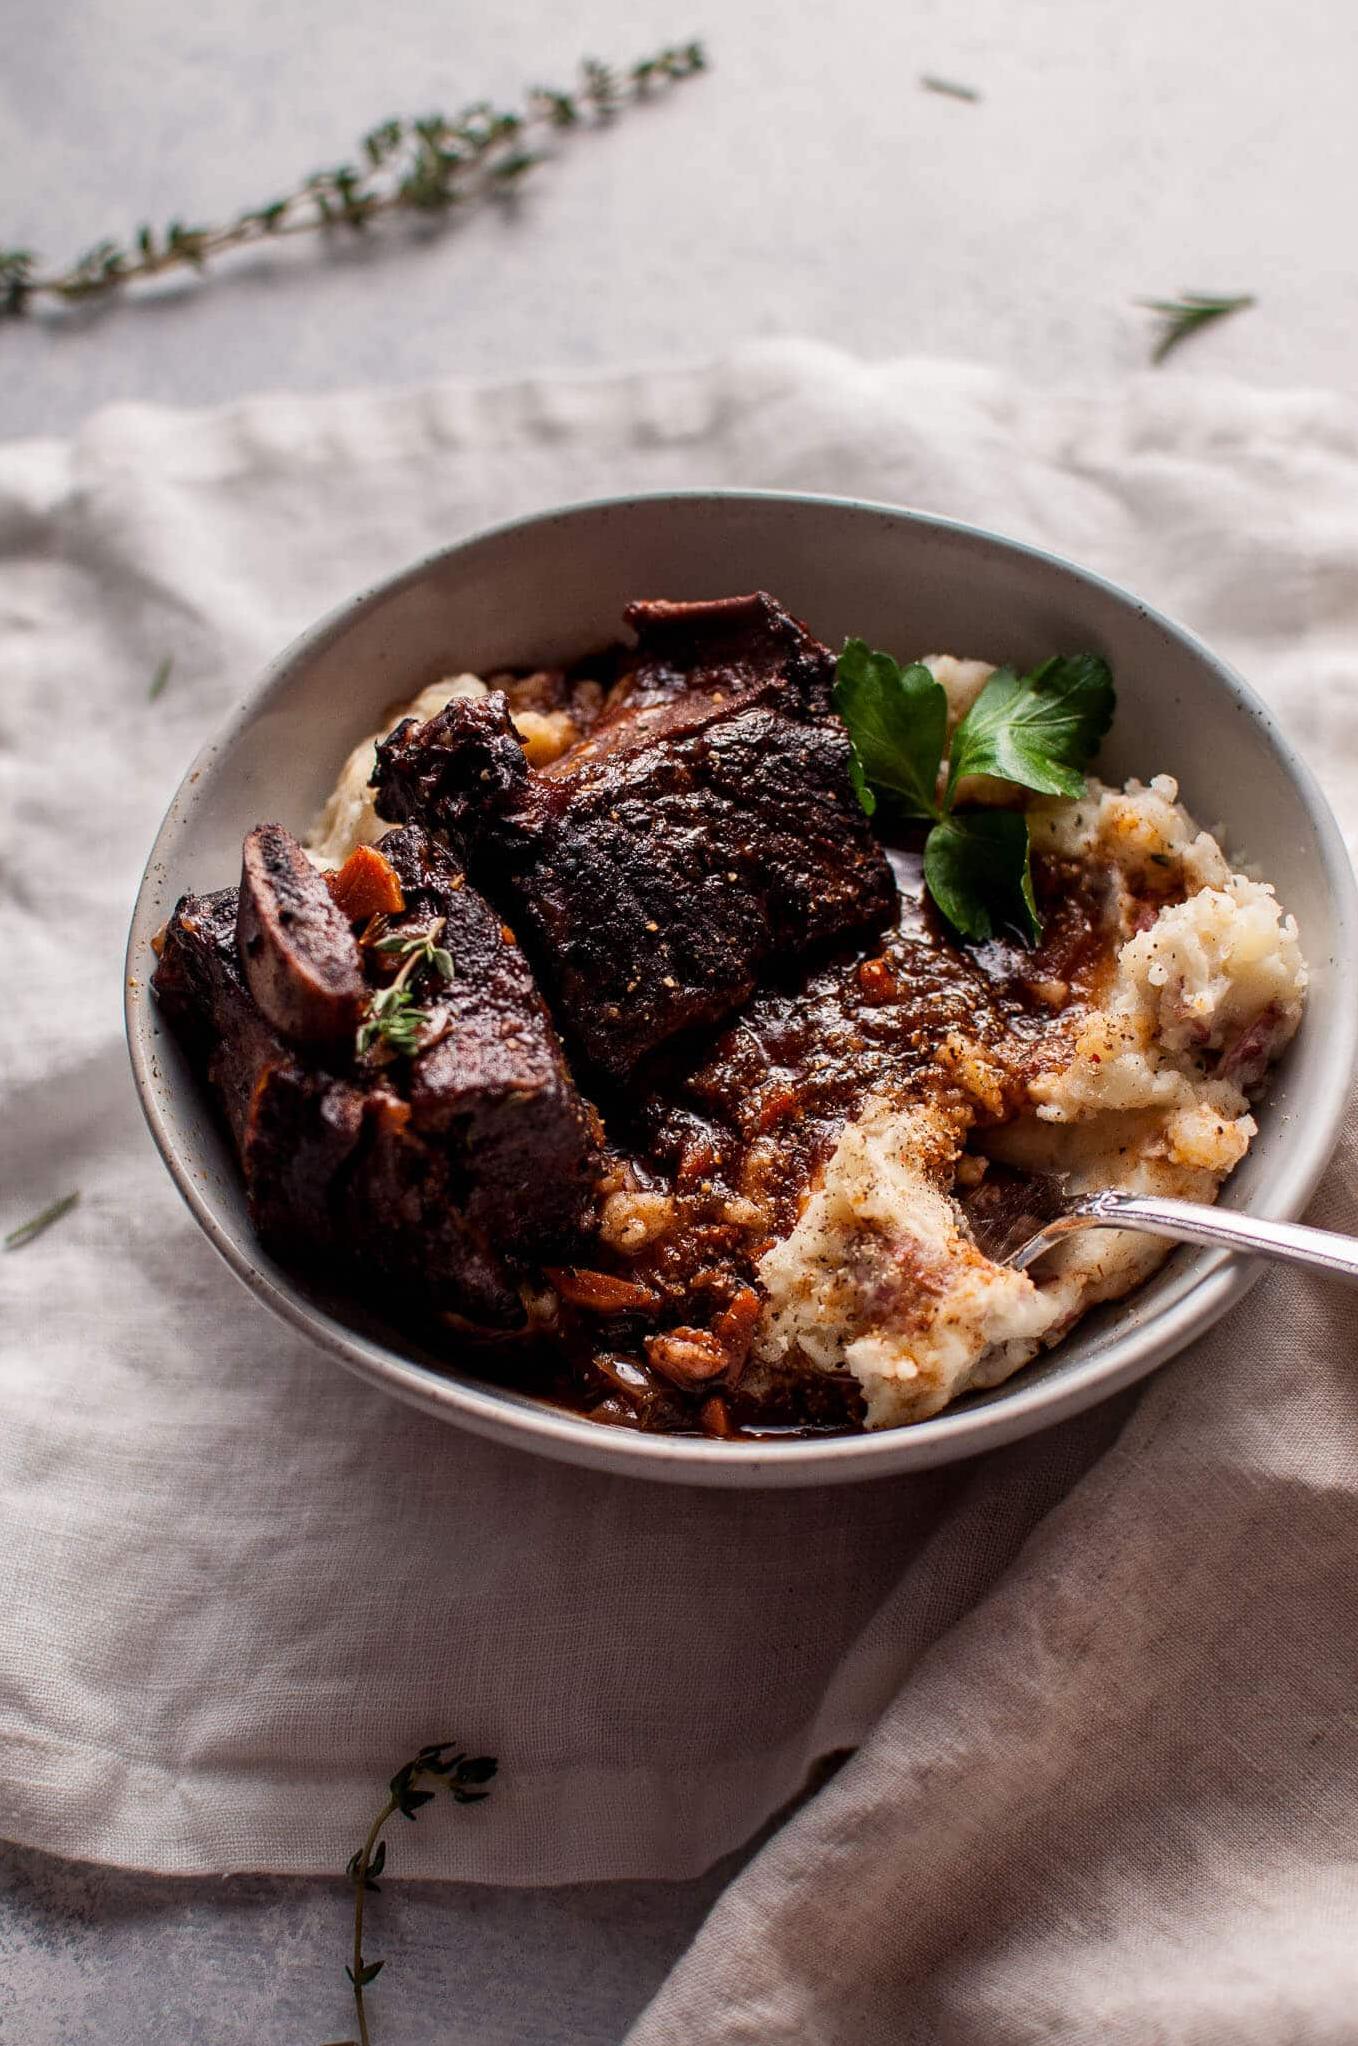  The ultimate comfort food that will become your new favorite